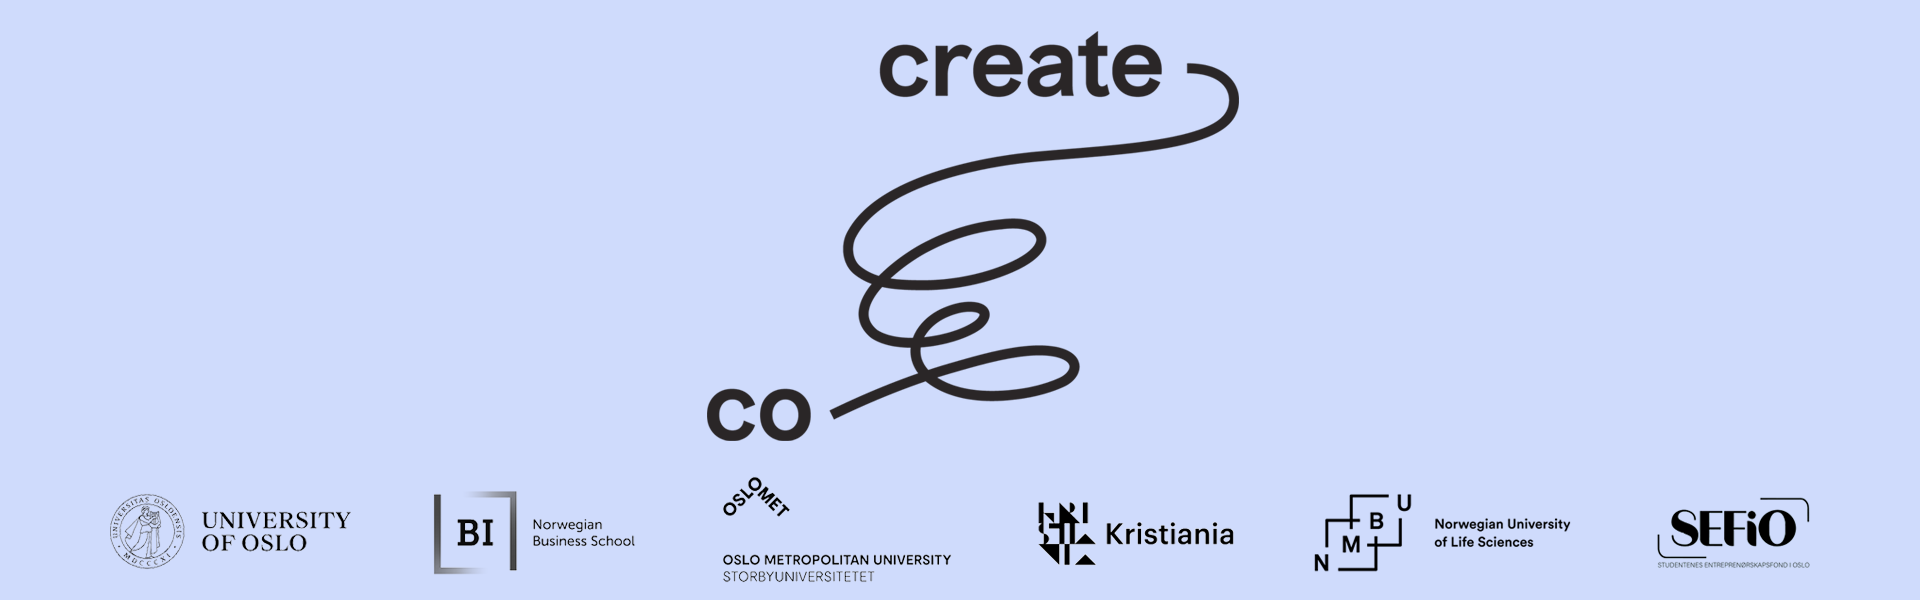 Logo Co-Create with logos of collaborators